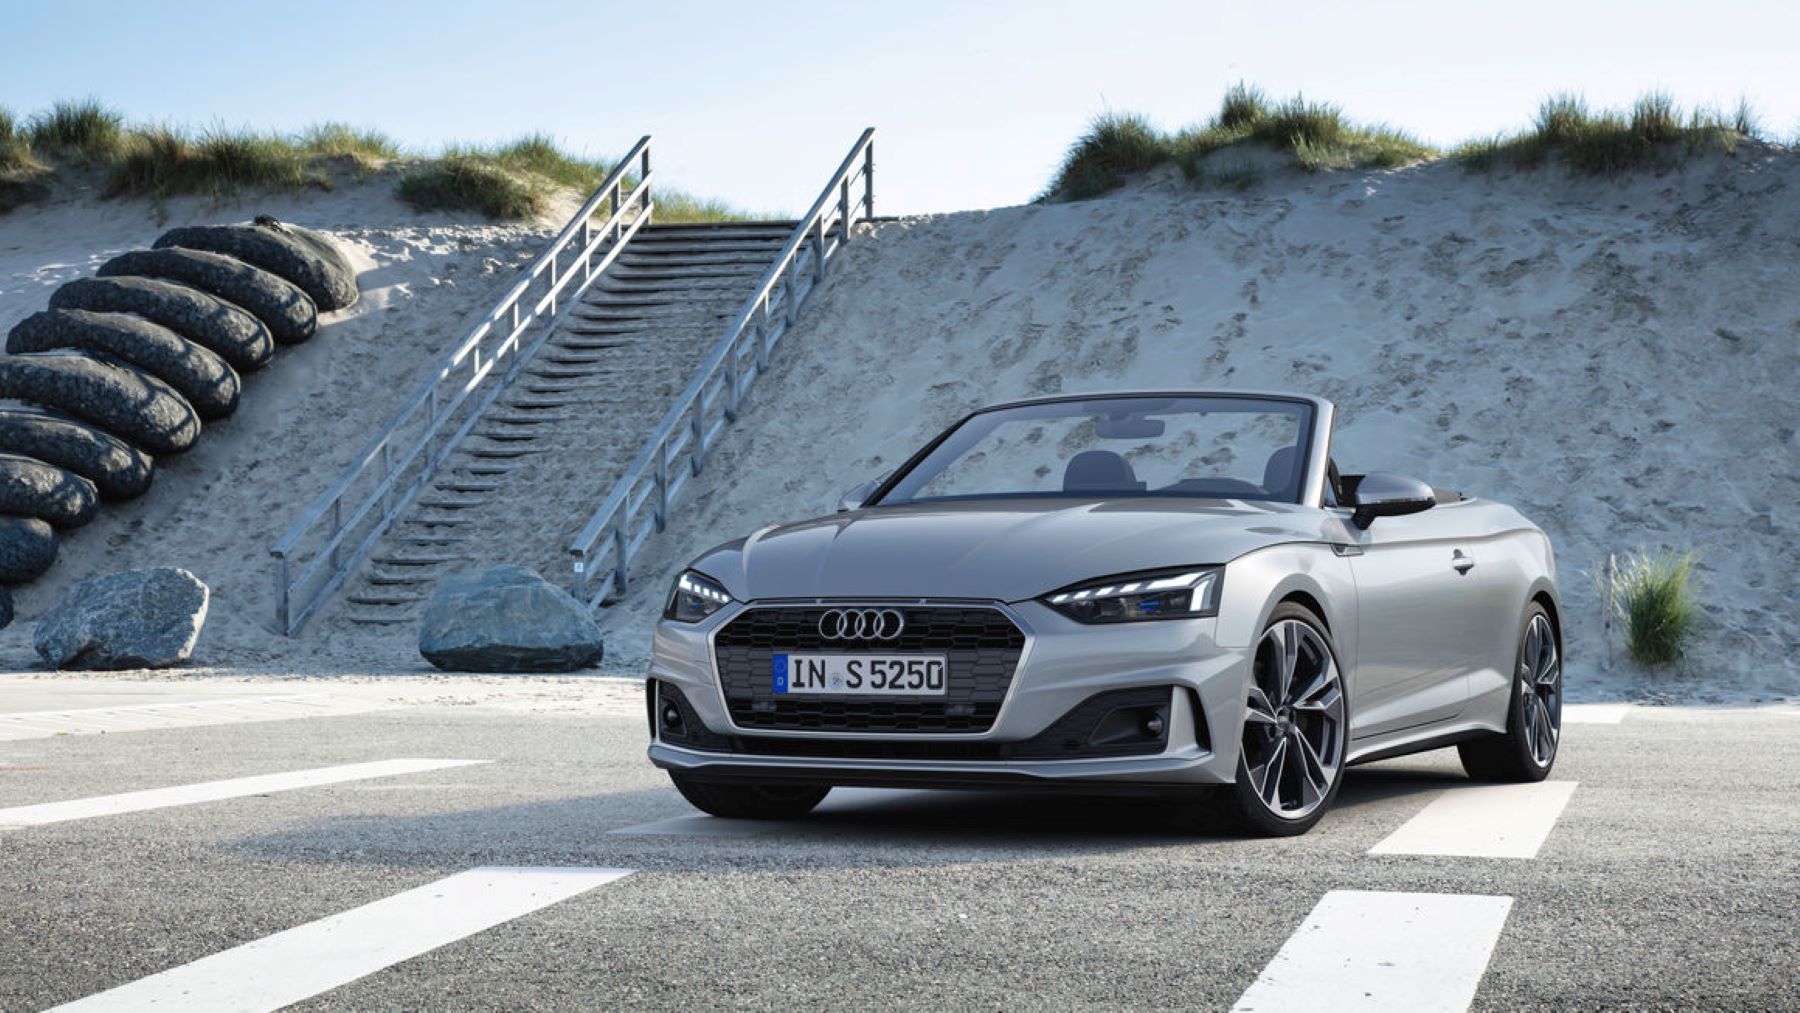 A silver gray Audi A5 convertible convertible in a parking lot next to a beach with stairs